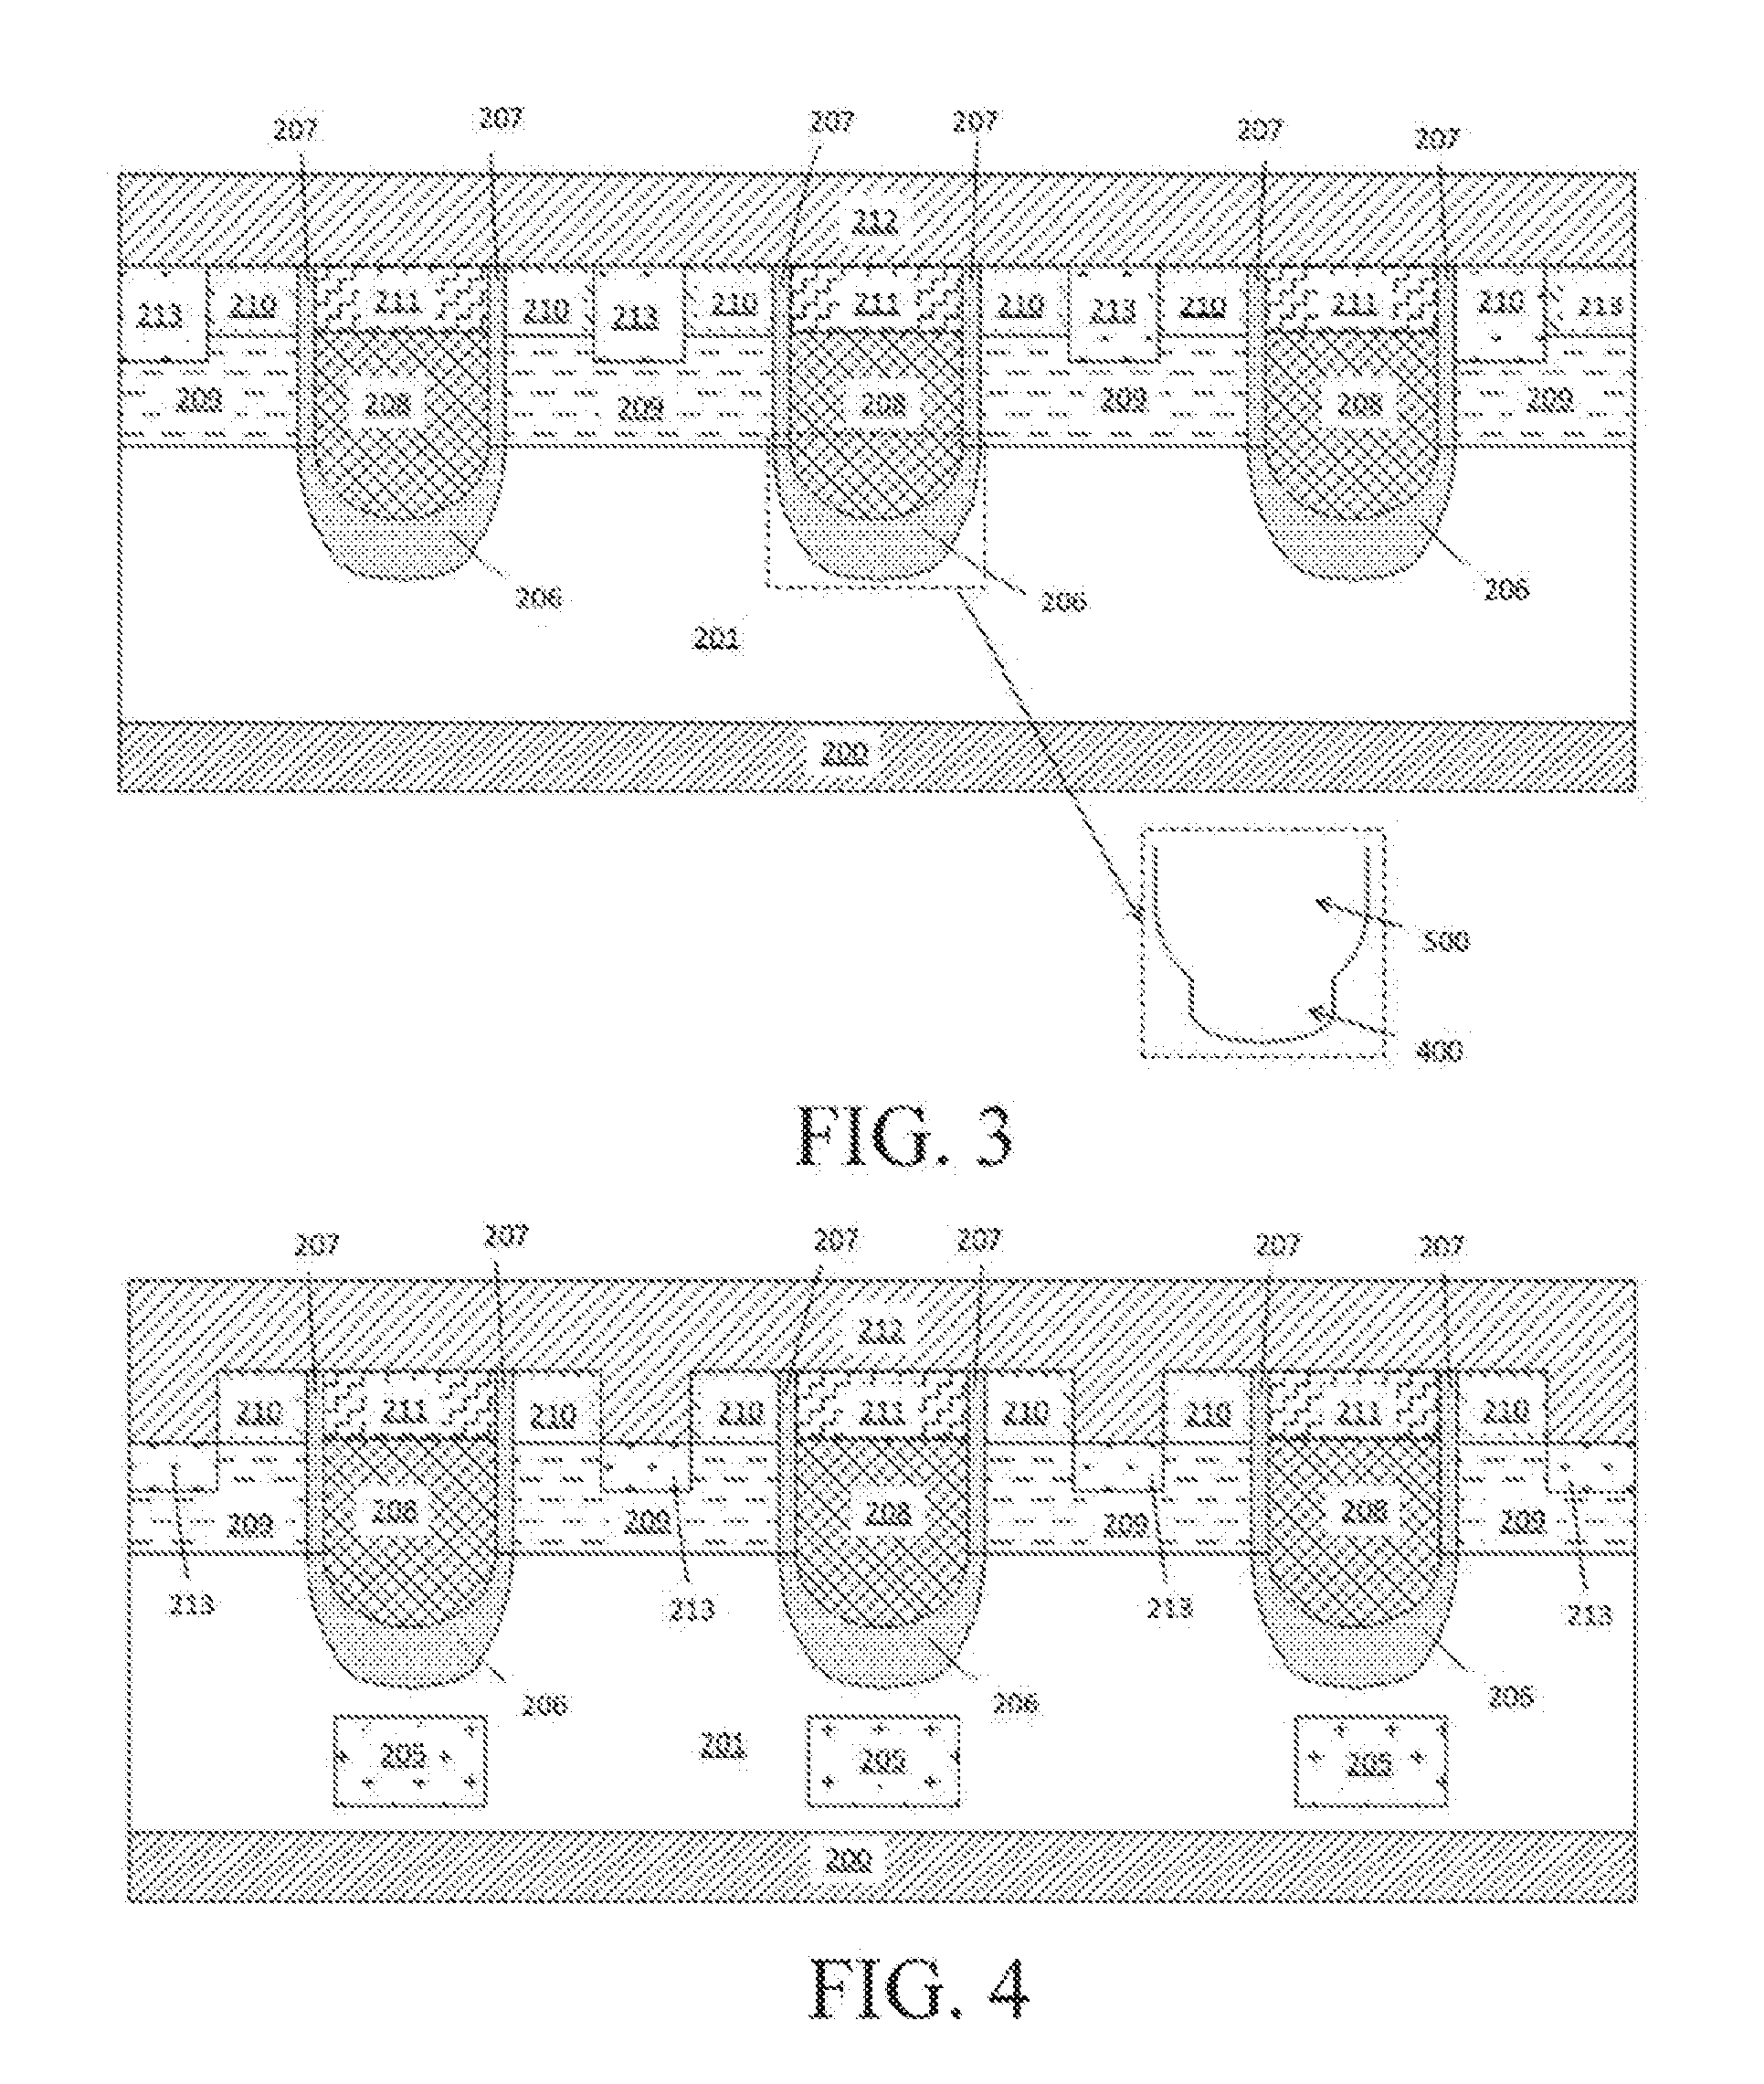 Power mos transistor and manufacturing method therefor